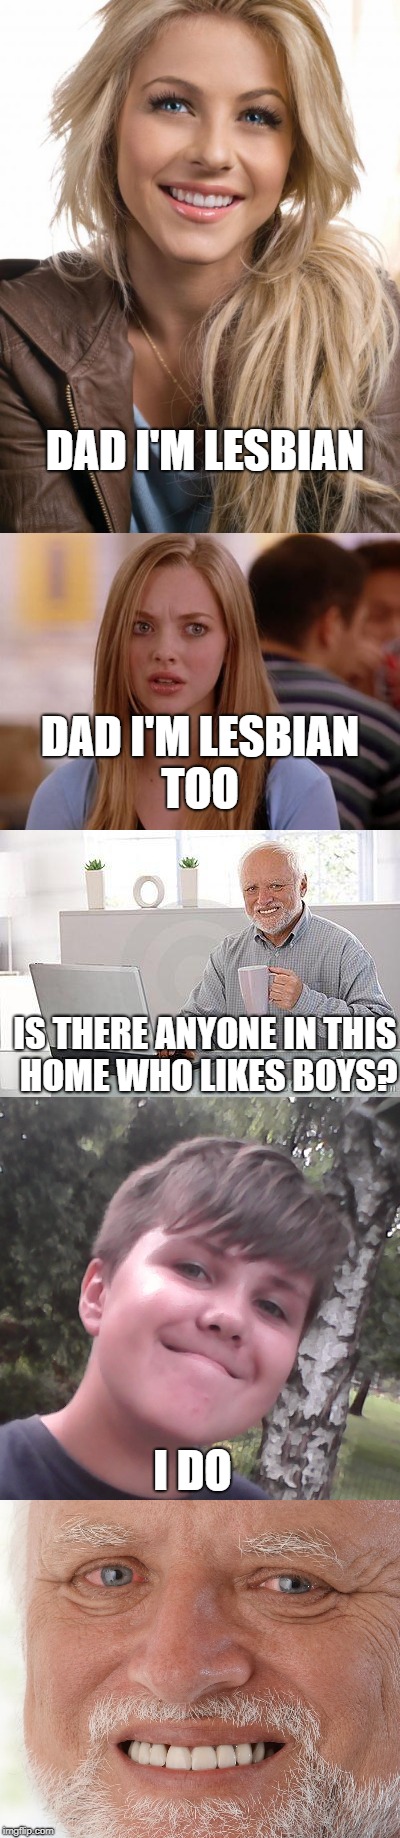 DAD I'M LESBIAN; DAD I'M LESBIAN TOO; IS THERE ANYONE IN THIS HOME WHO LIKES BOYS? I DO | image tagged in harold,family | made w/ Imgflip meme maker